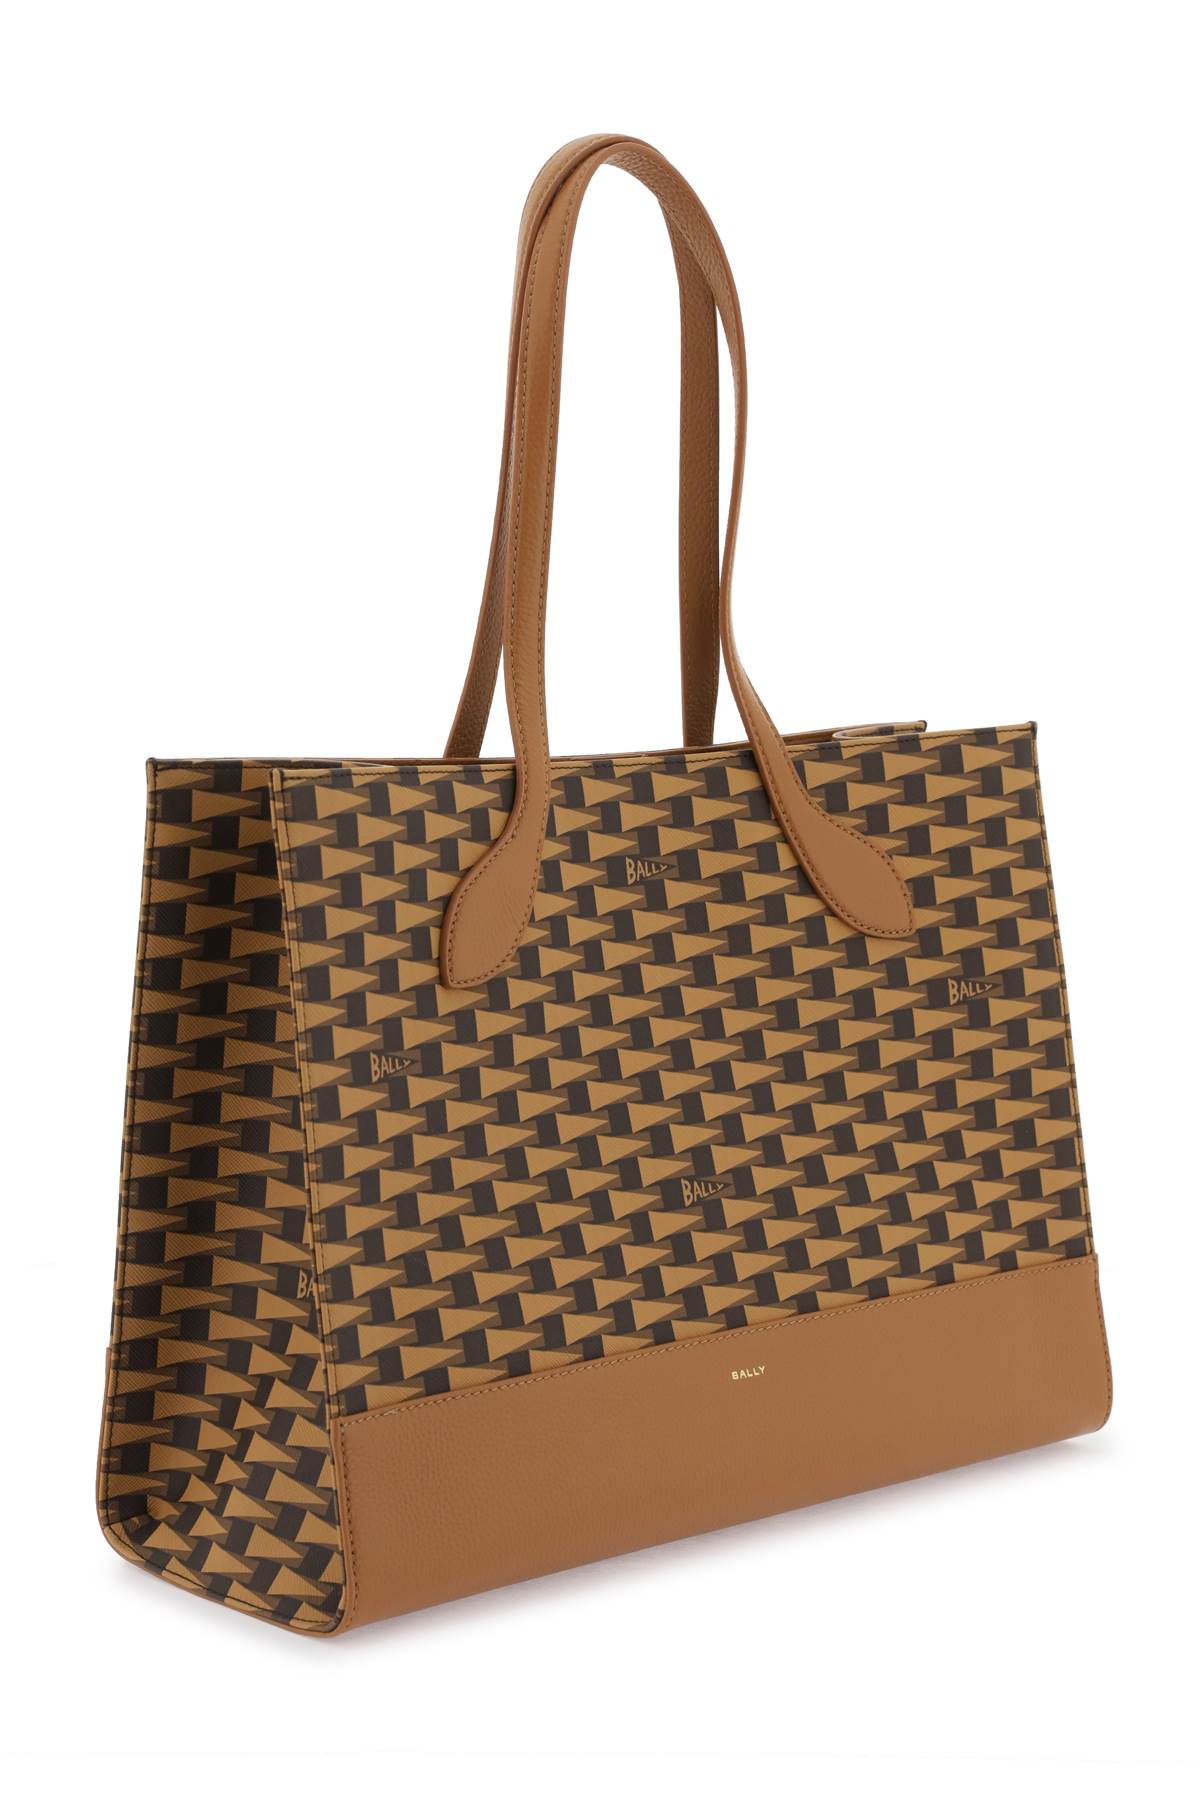 Bally Pennant Motif Coated Canvas Tote Bag